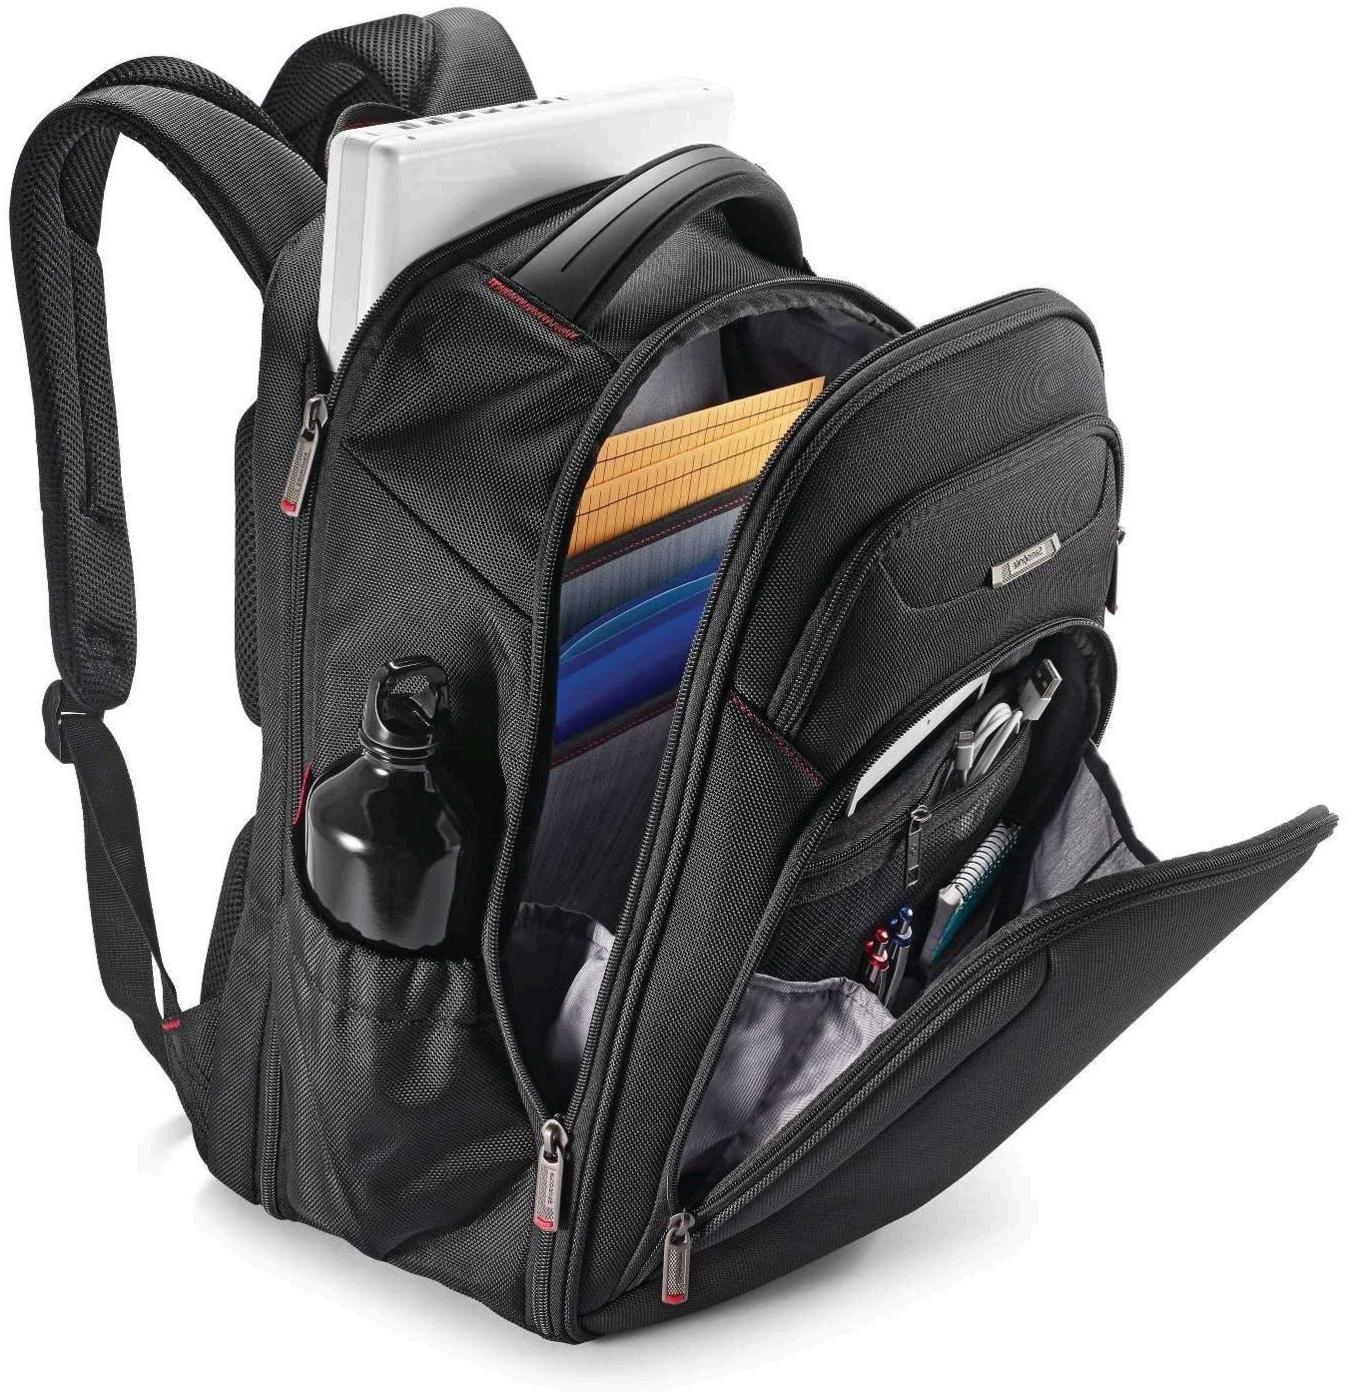 Samsonite Xenon 3.0 Large Backpack-Checkpoint Friendly, Black, Size One ...